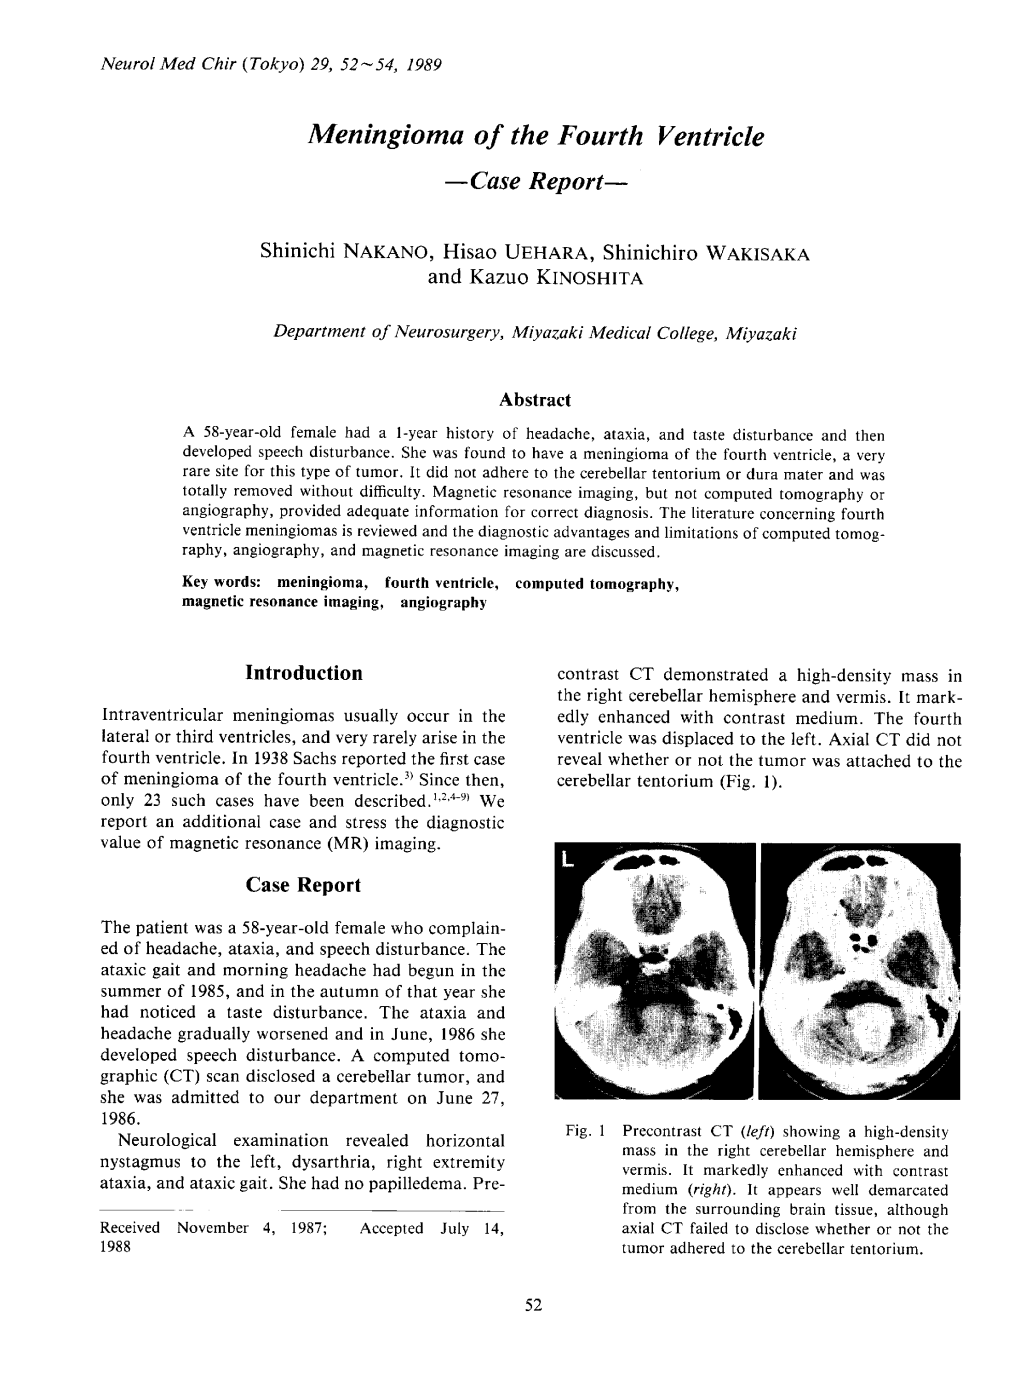 Meningioma of the Fourth Ventricle -Case Report